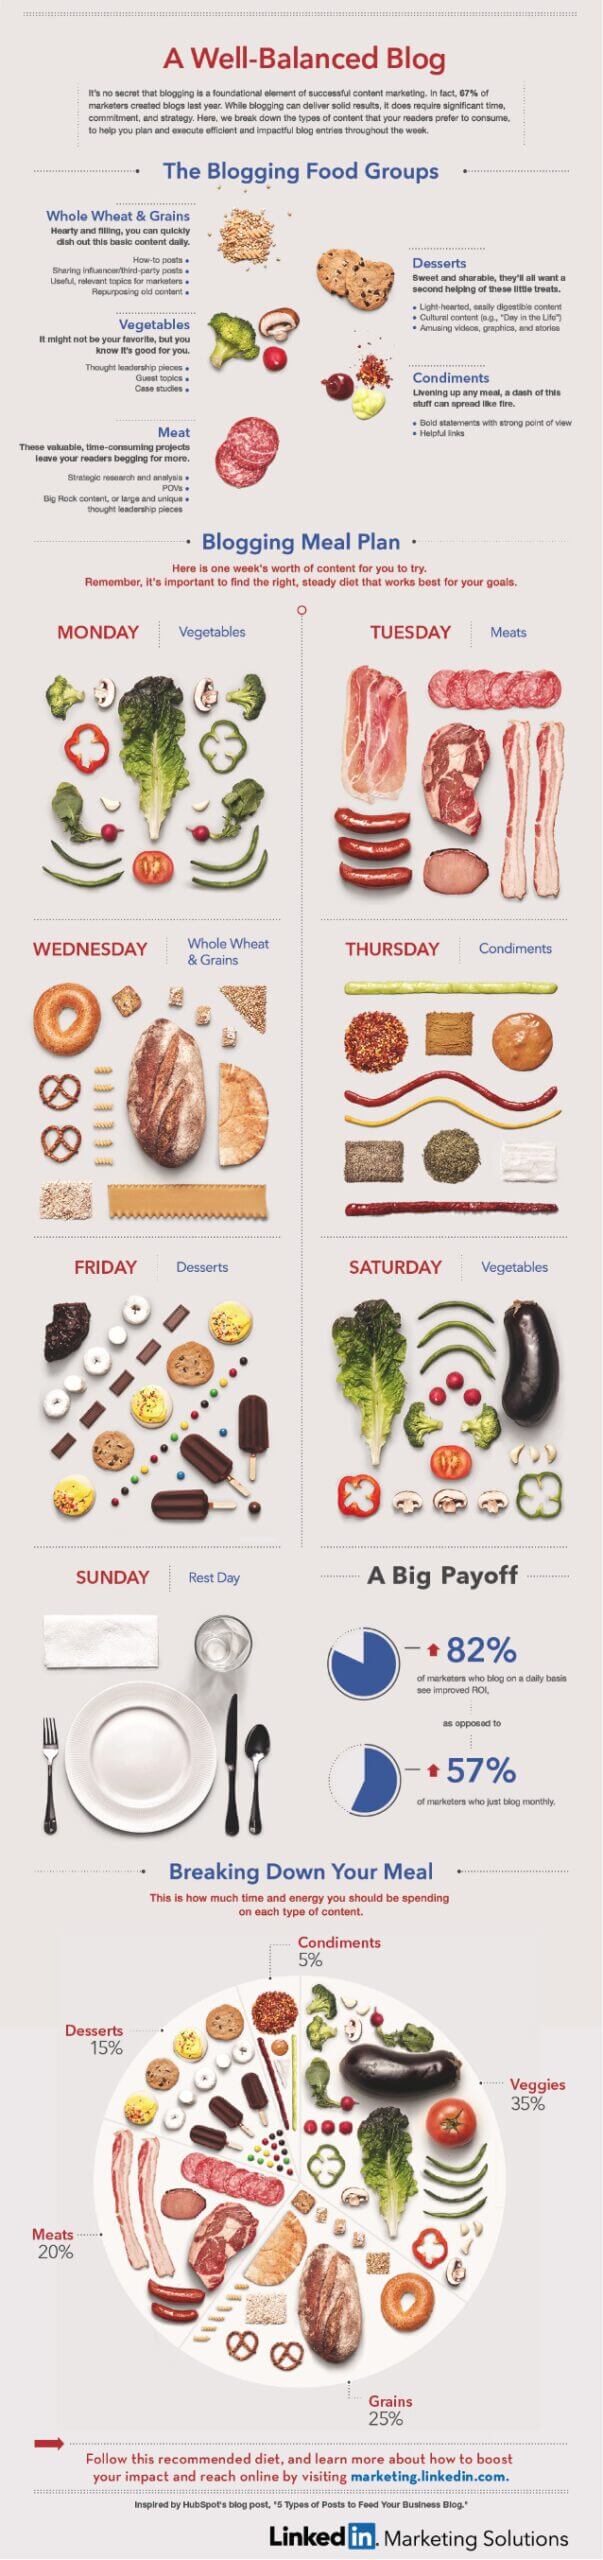 the-blogging-food-groups-a-wellbalanced-diet-of-content-infographic-1-638